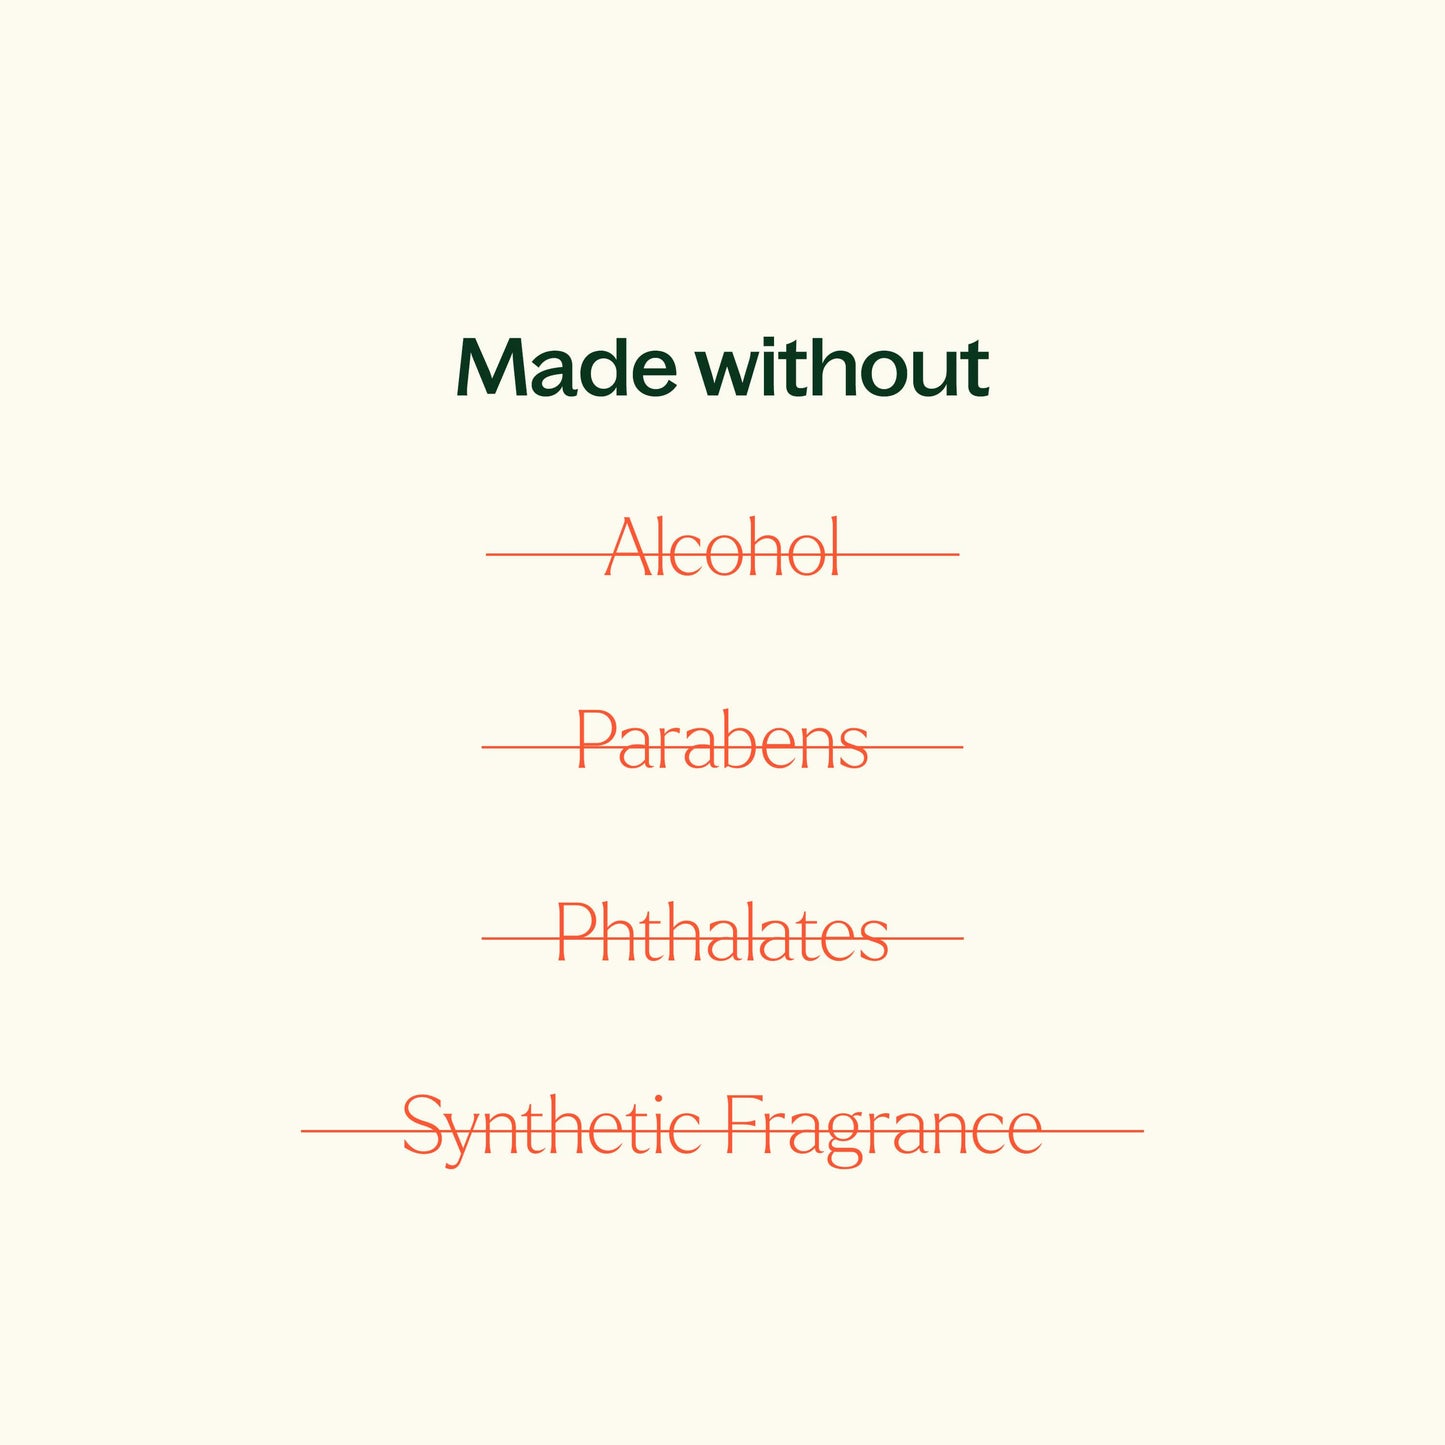 made without alcohol, parabens, phthalates, synthetic fragrance